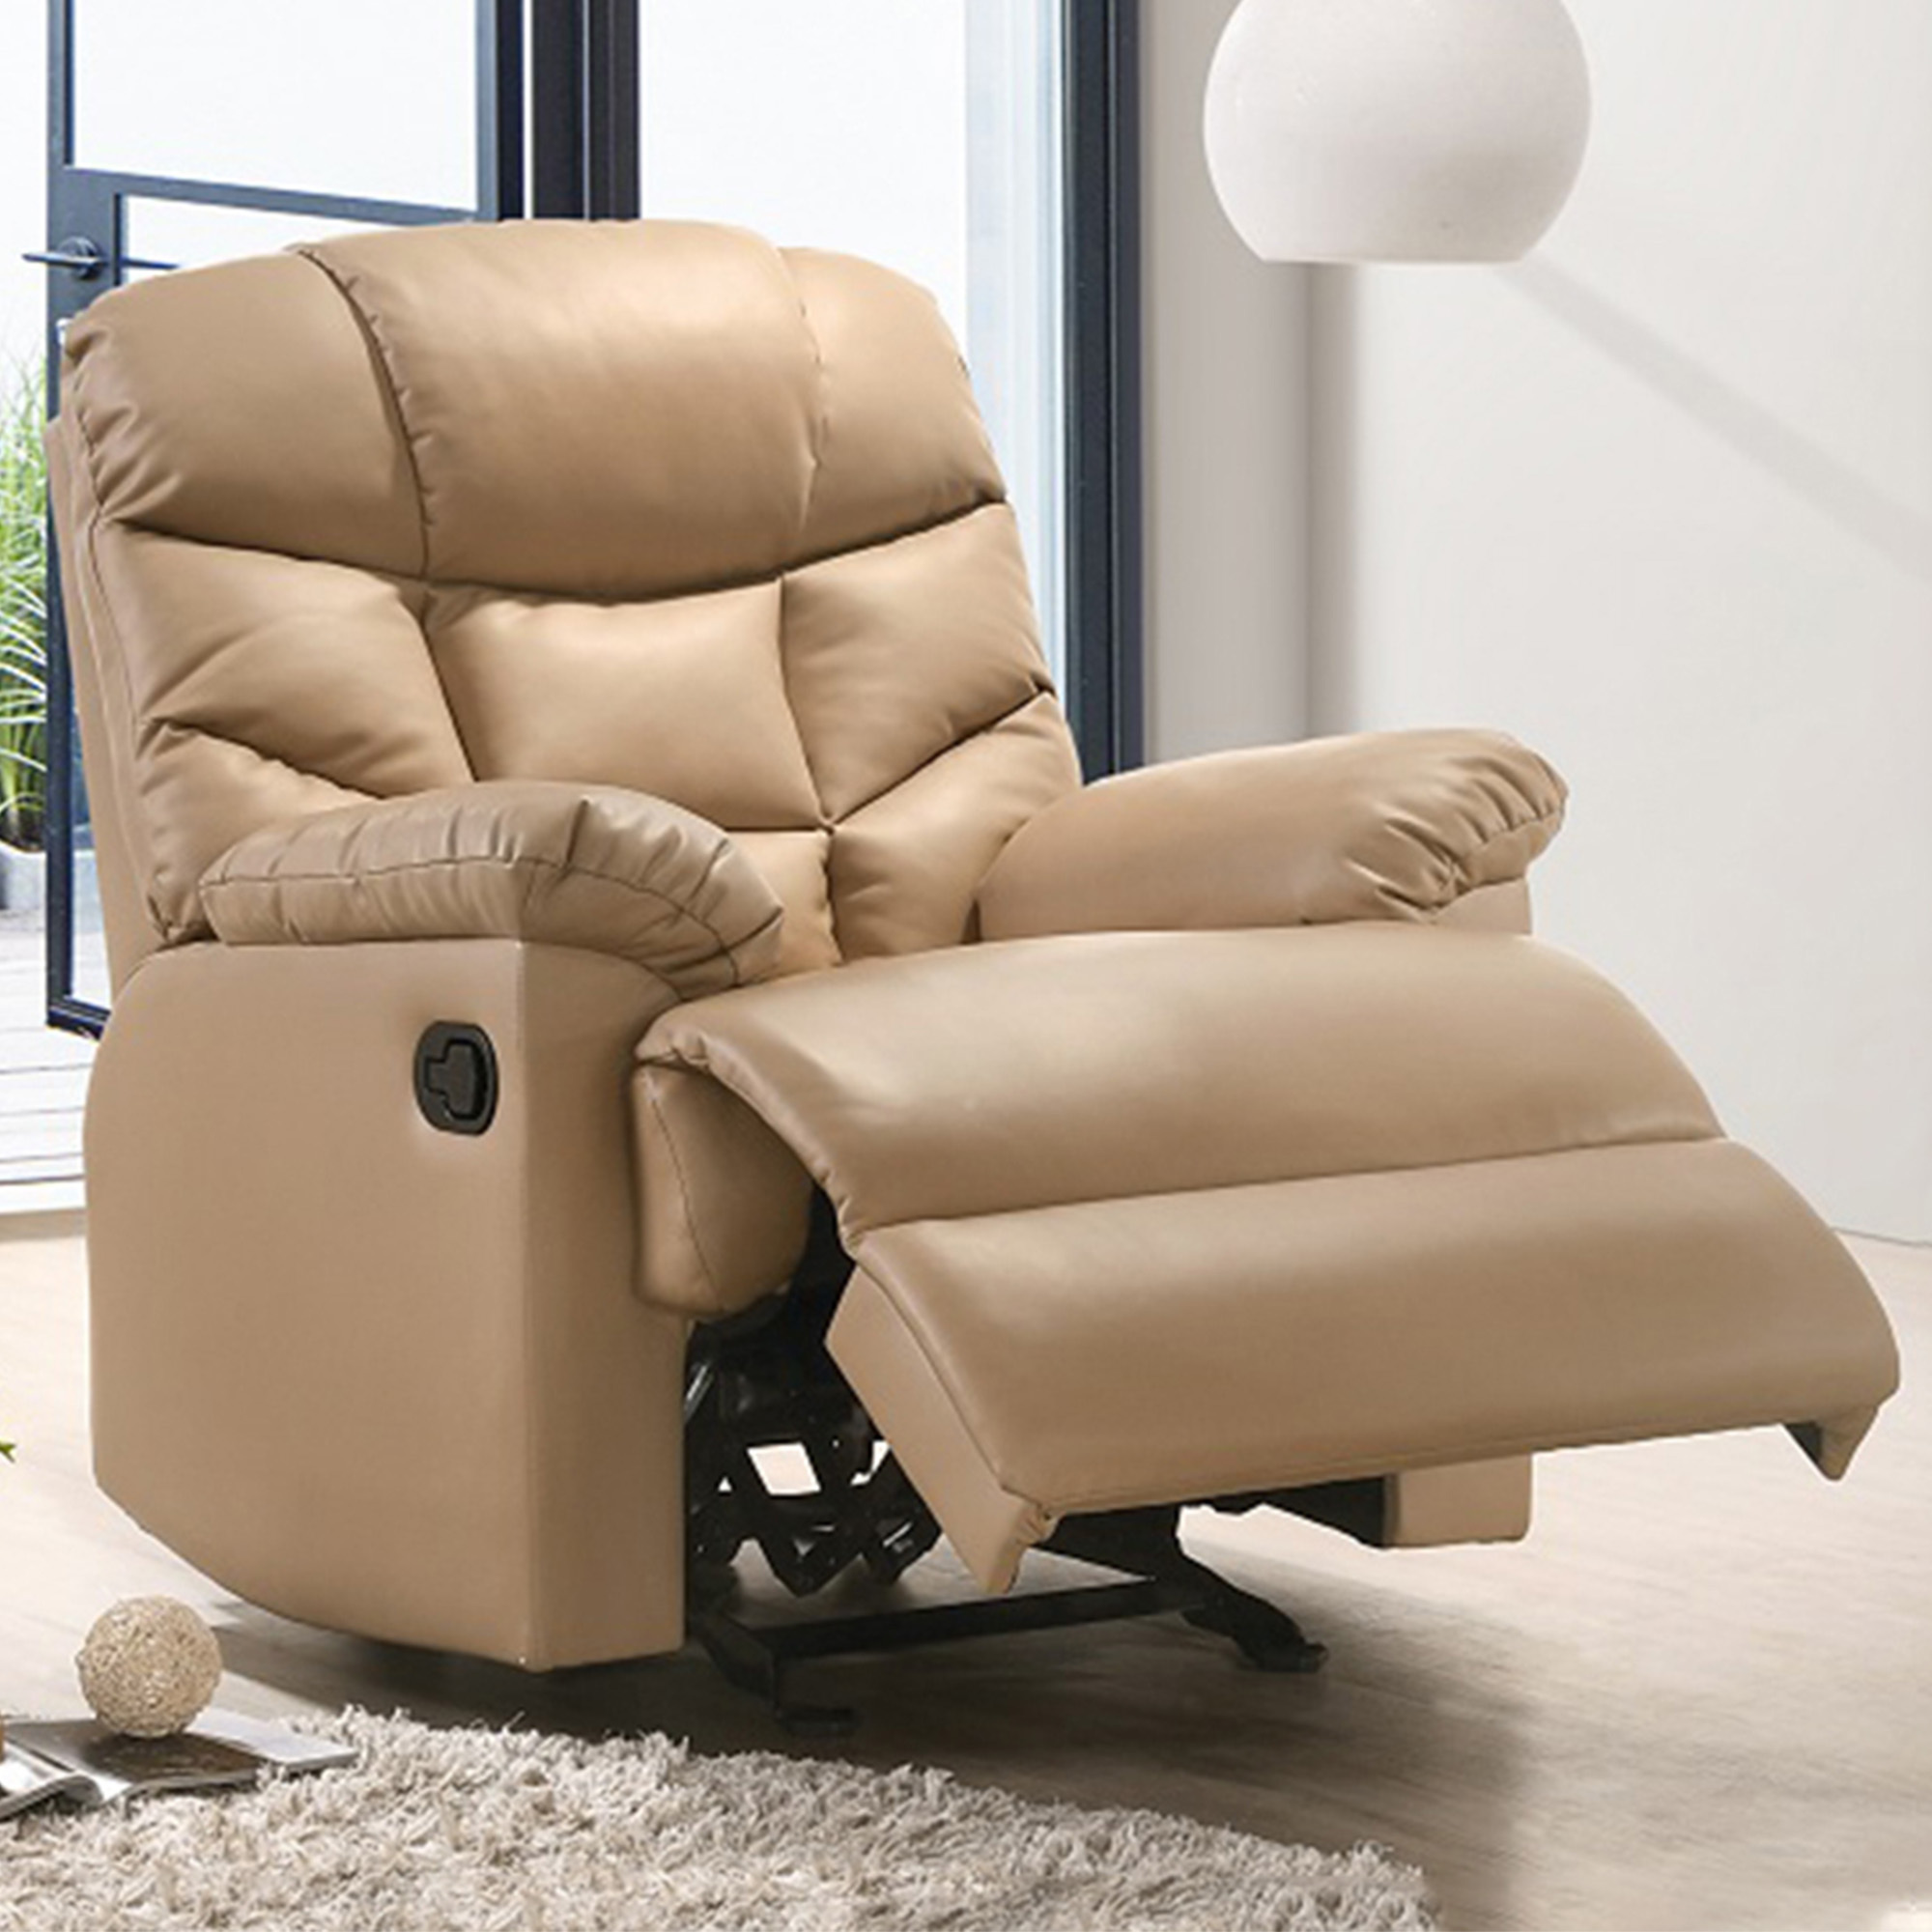 Spencer Wood Framed Recliner Modern Recliner Chairs Contemporary Recliners Stylish Recliners